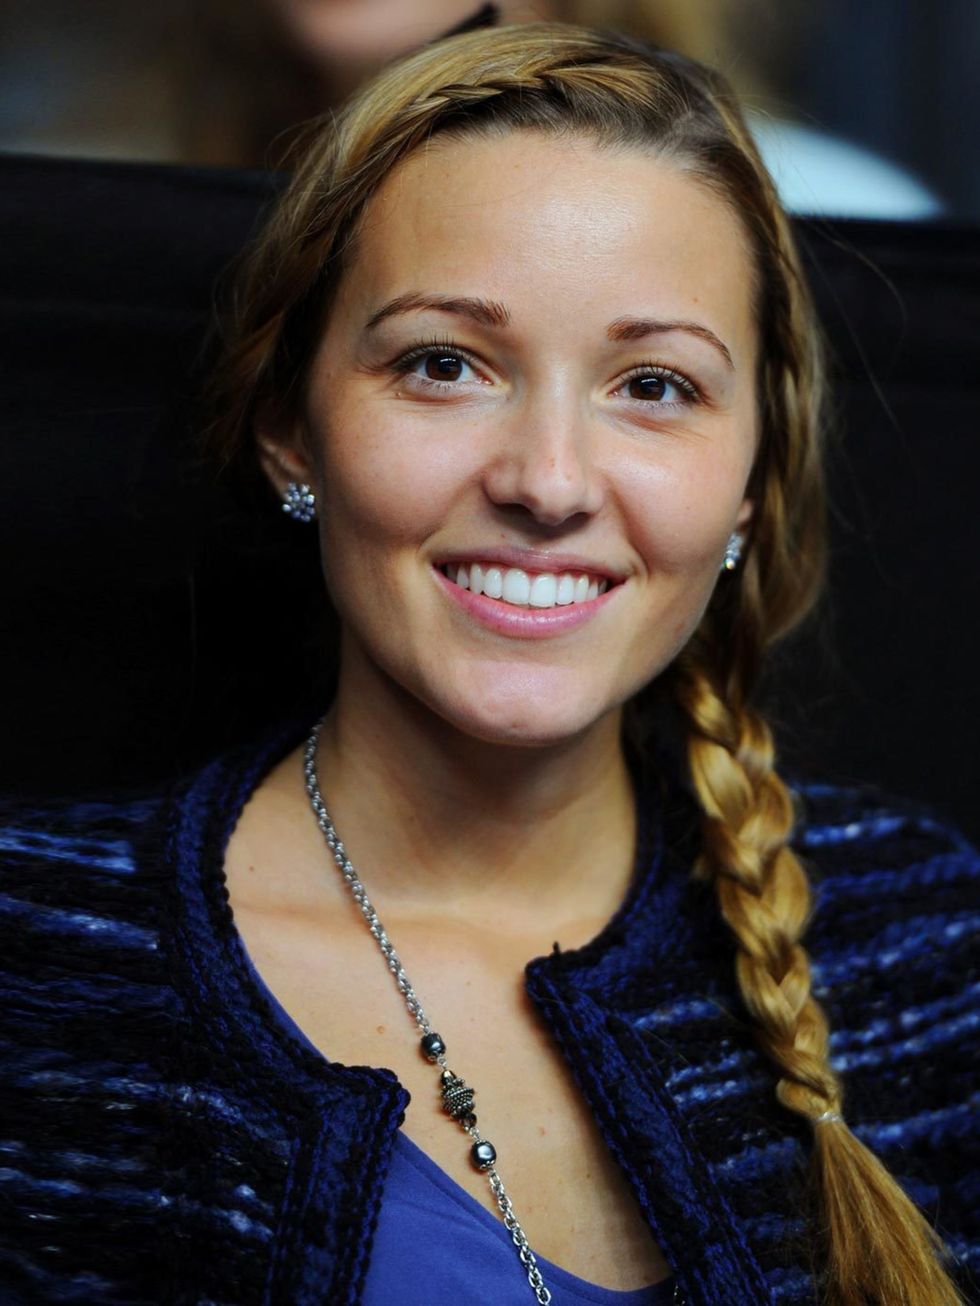 <p><strong>Jelena Ristic</strong></p><p><strong>WWAG Ranking:</strong> No 2</p><p><strong>Doubles with:</strong> Novak Djokovic</p><p>Always perfectly poised, Ristic has a look of Jessica Alba about her. Shes also dating the world No.1 Djokovic.  Enough 